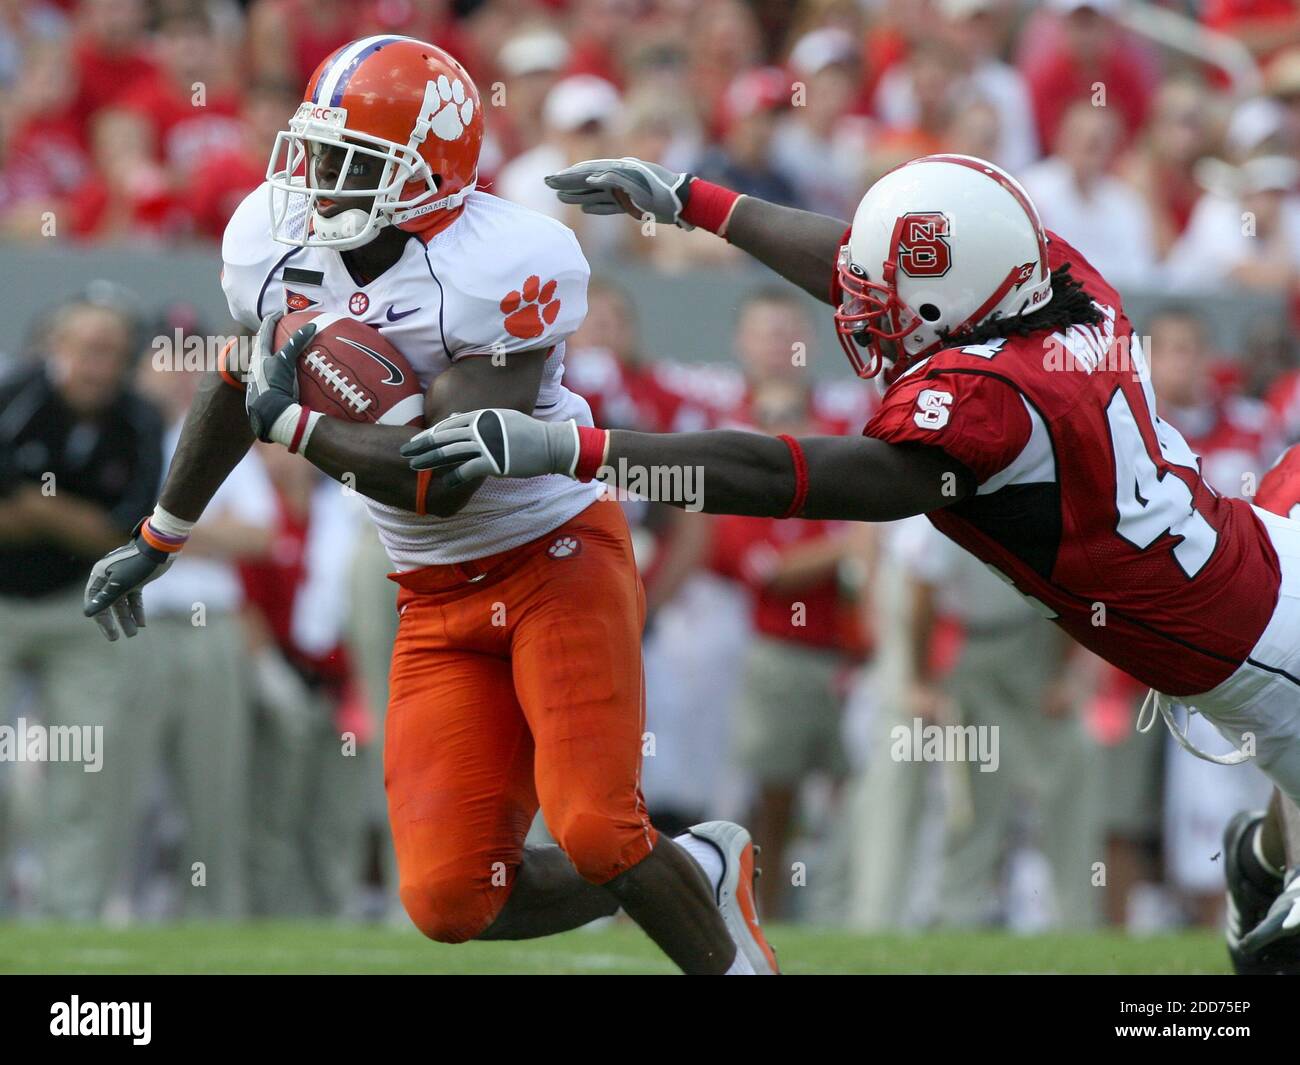 NO FILM, NO VIDEO, NO TV, NO DOCUMENTARY - Clemson's Jacoby Ford tries to evade the grasp of N.C. State's Ray Michel in the first half on Saturday, September 22, 2007, at Carter-Finley Stadium at Carter-Finley Stadium in Raleigh, NC, USA on September 22, 2007. The Tigers defeated the Wolfpack 42-20. Photo by Ethan Hyman/Raleigh News & Observer/MCT/Cameleon/ABACAPRESSS.COM Stock Photo